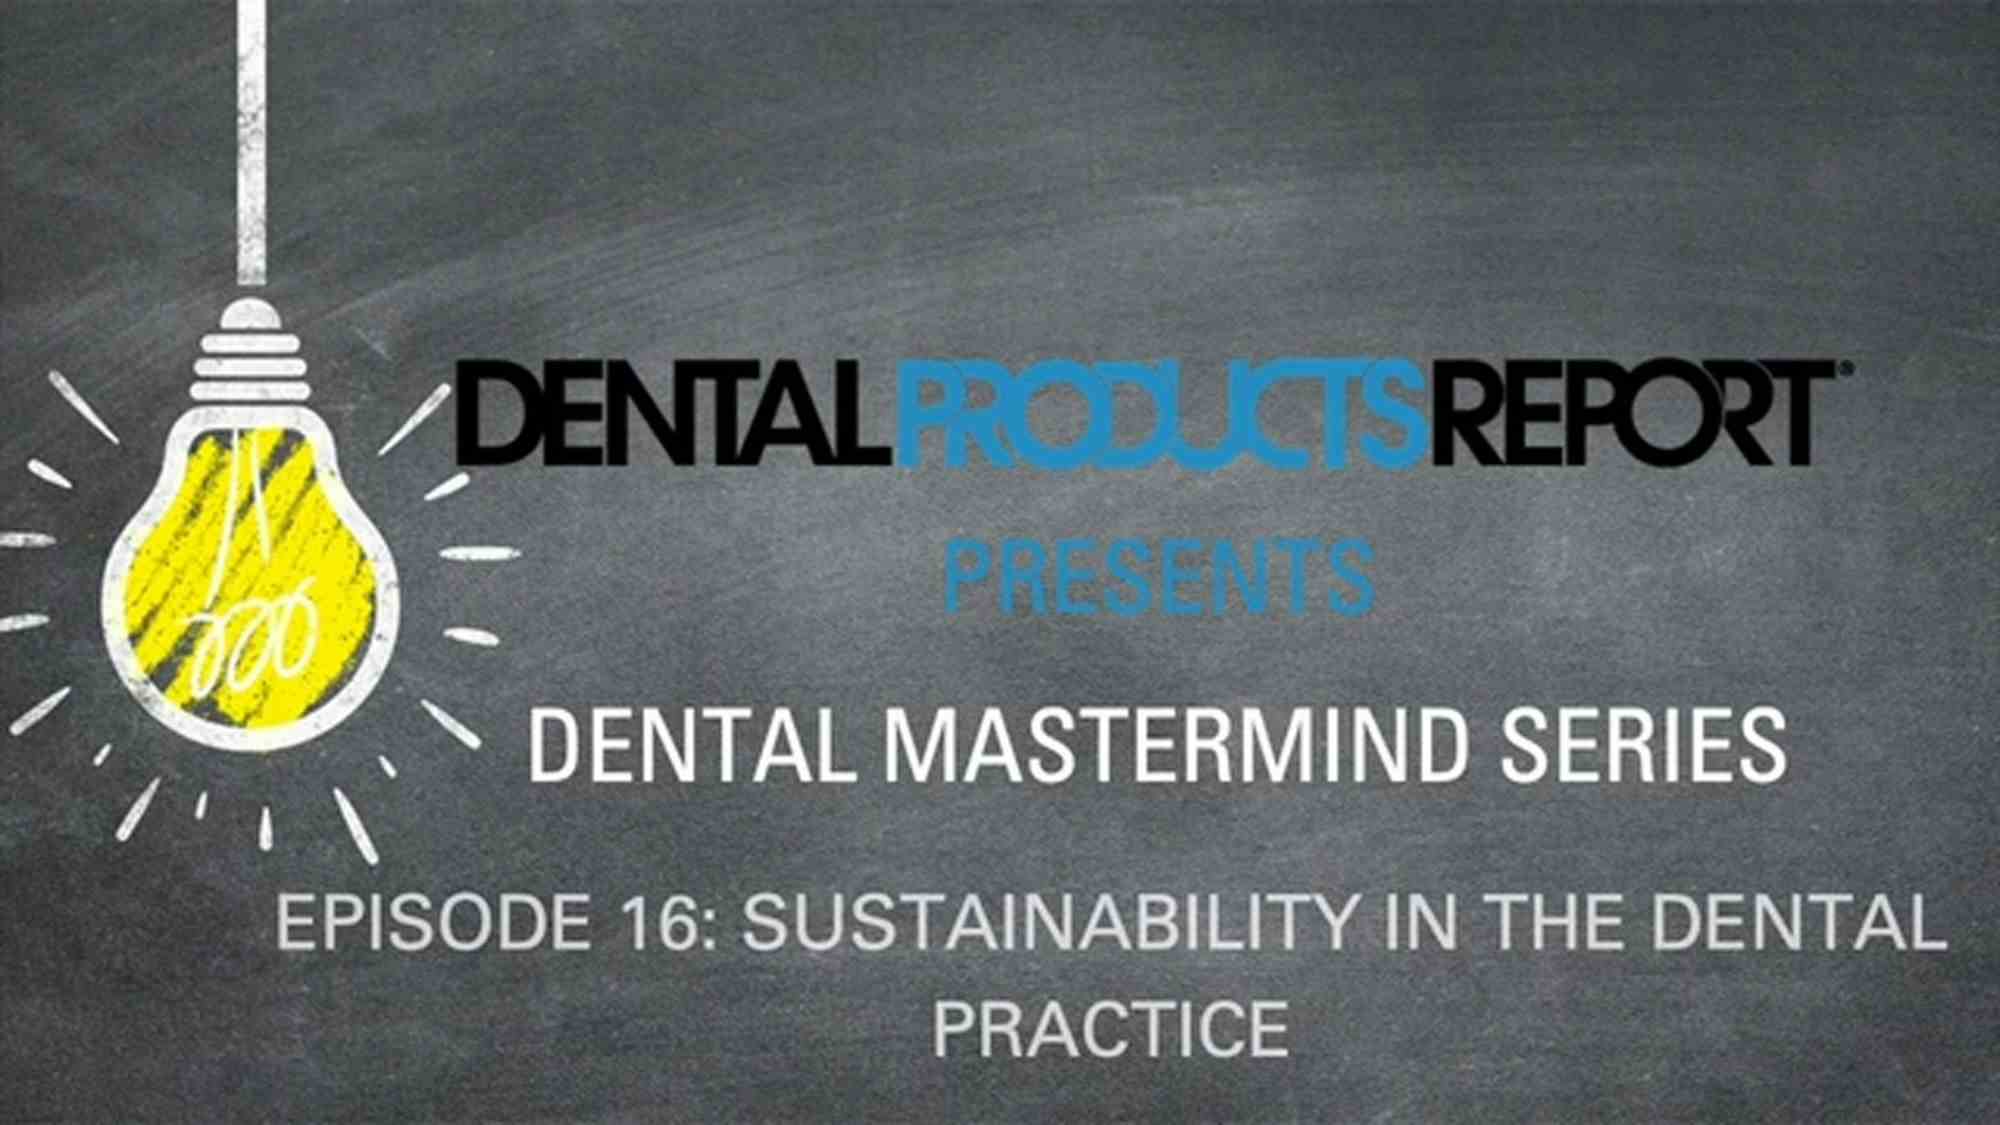 Mastermind - Episode 16 - Sustainability in the Dental Practice